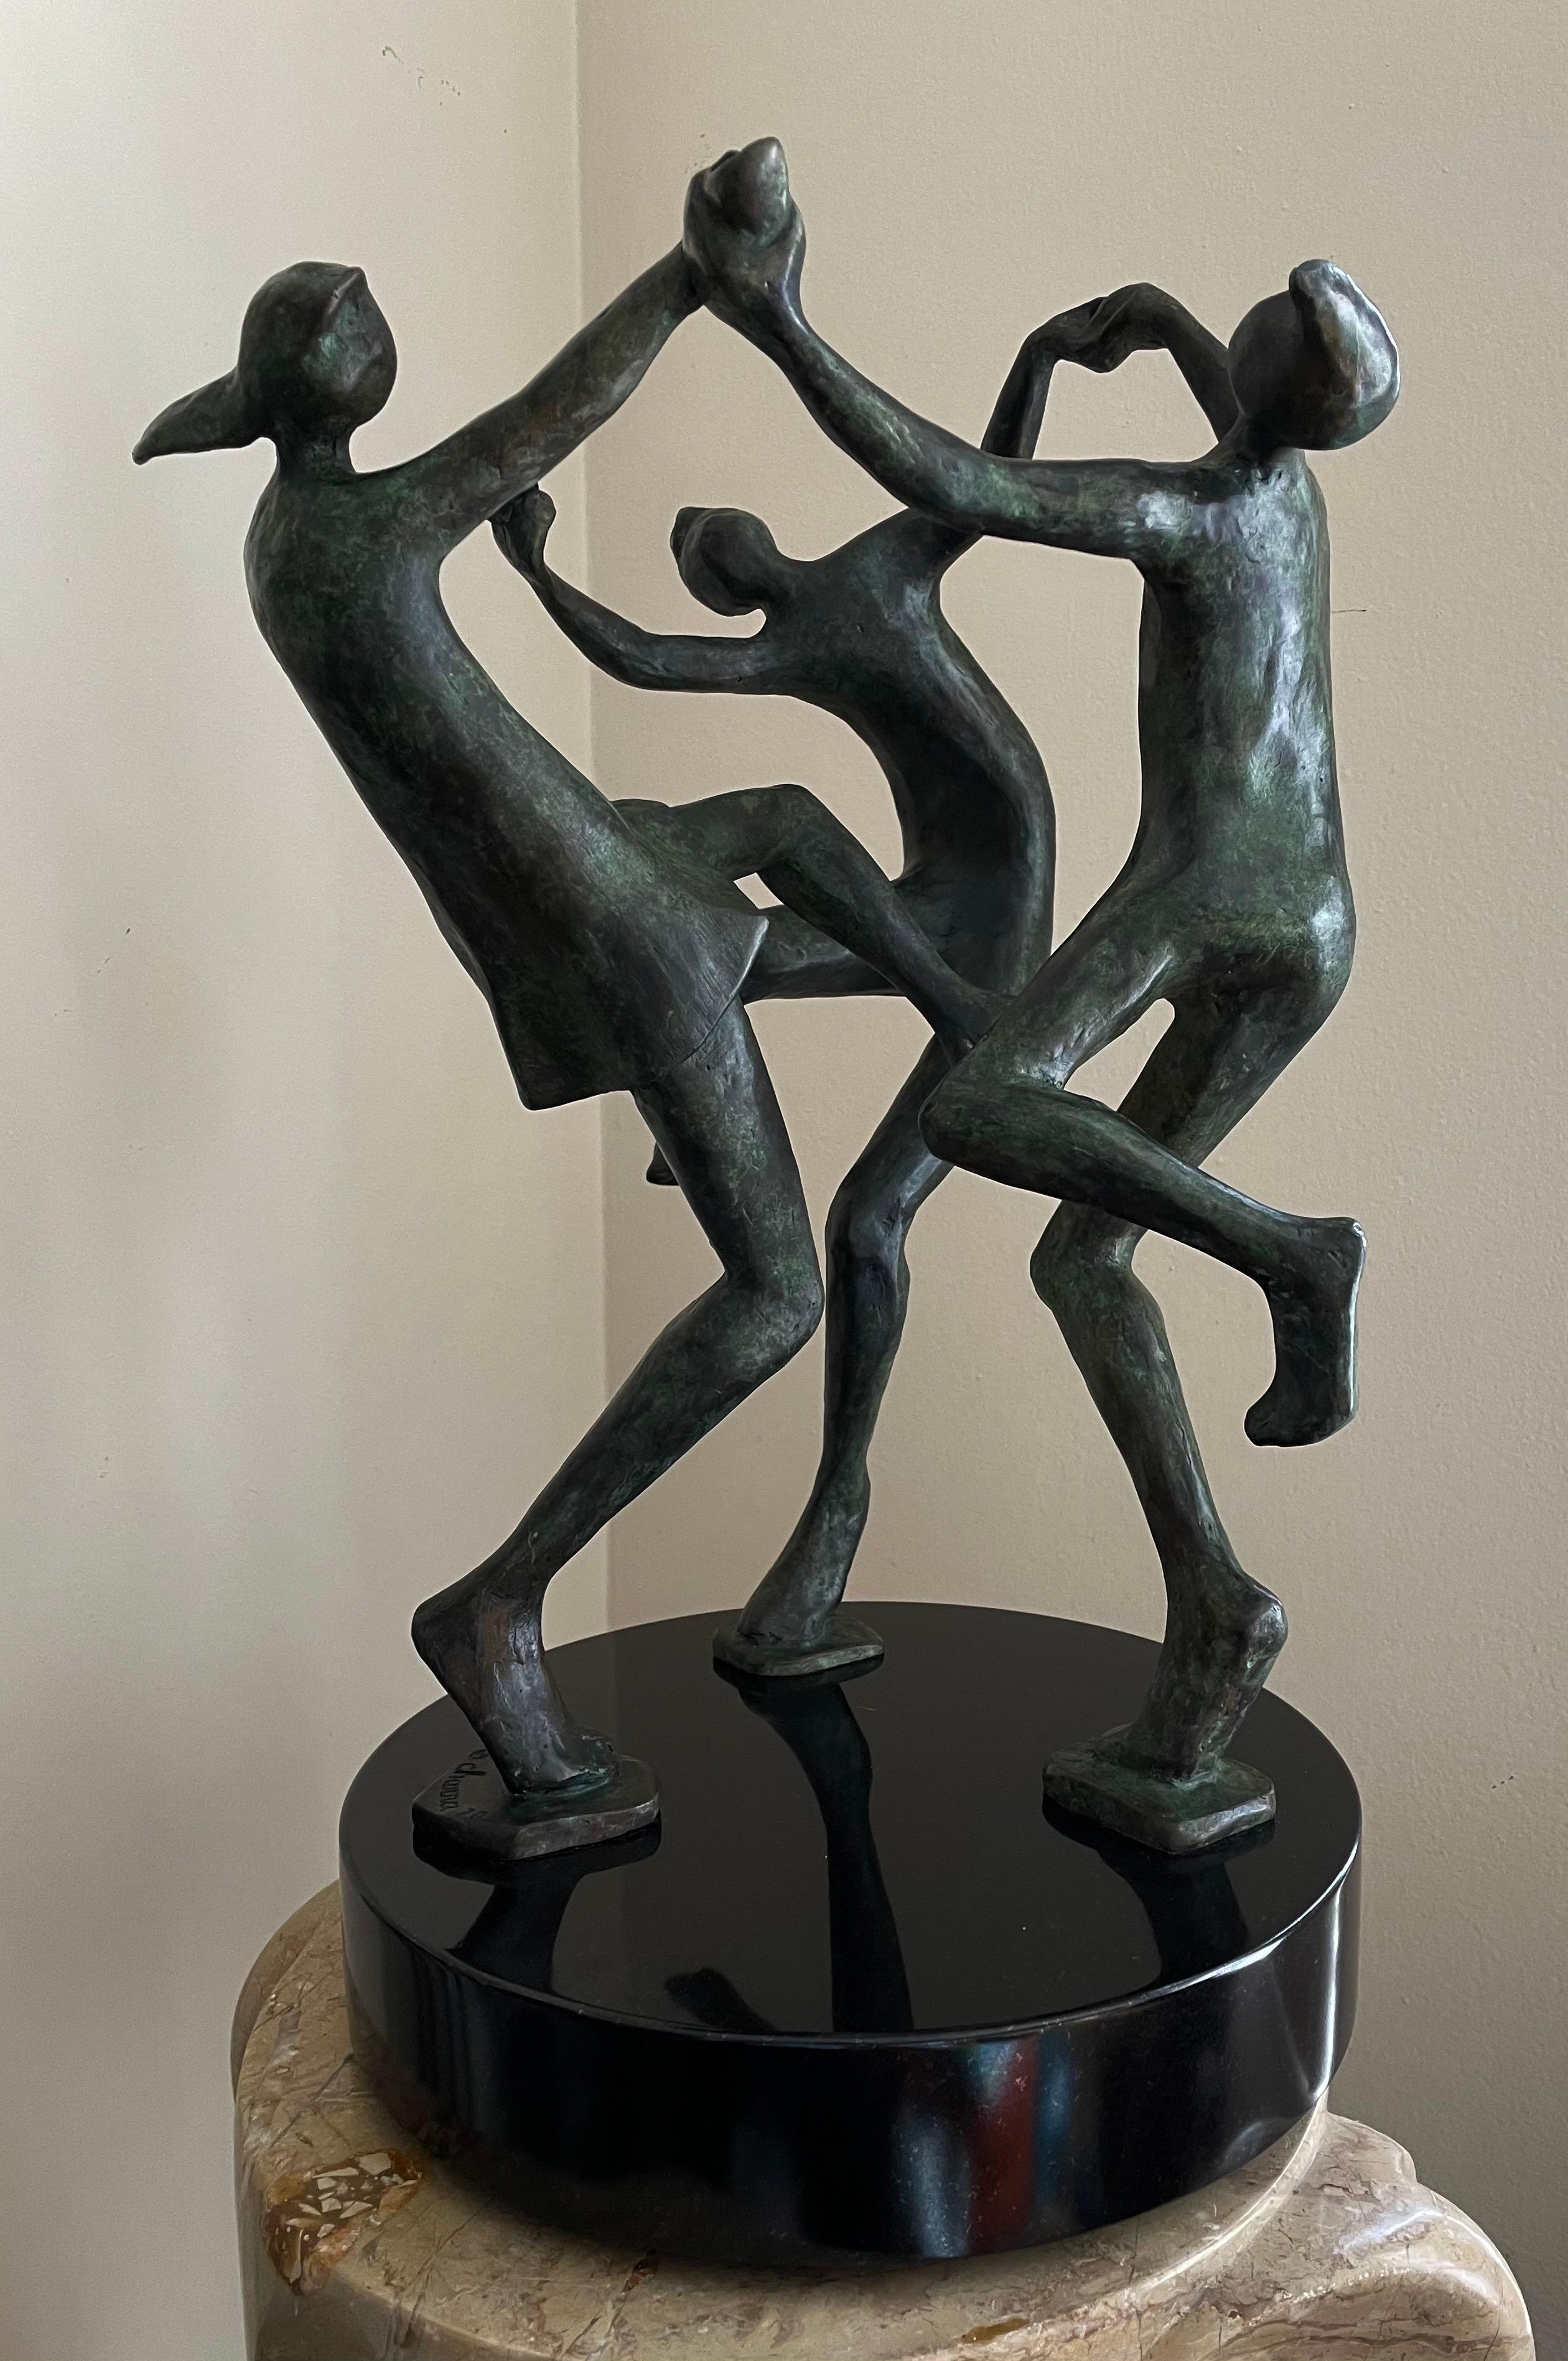  THE DANCE OF JOY - Sculpture by Charna Rickey